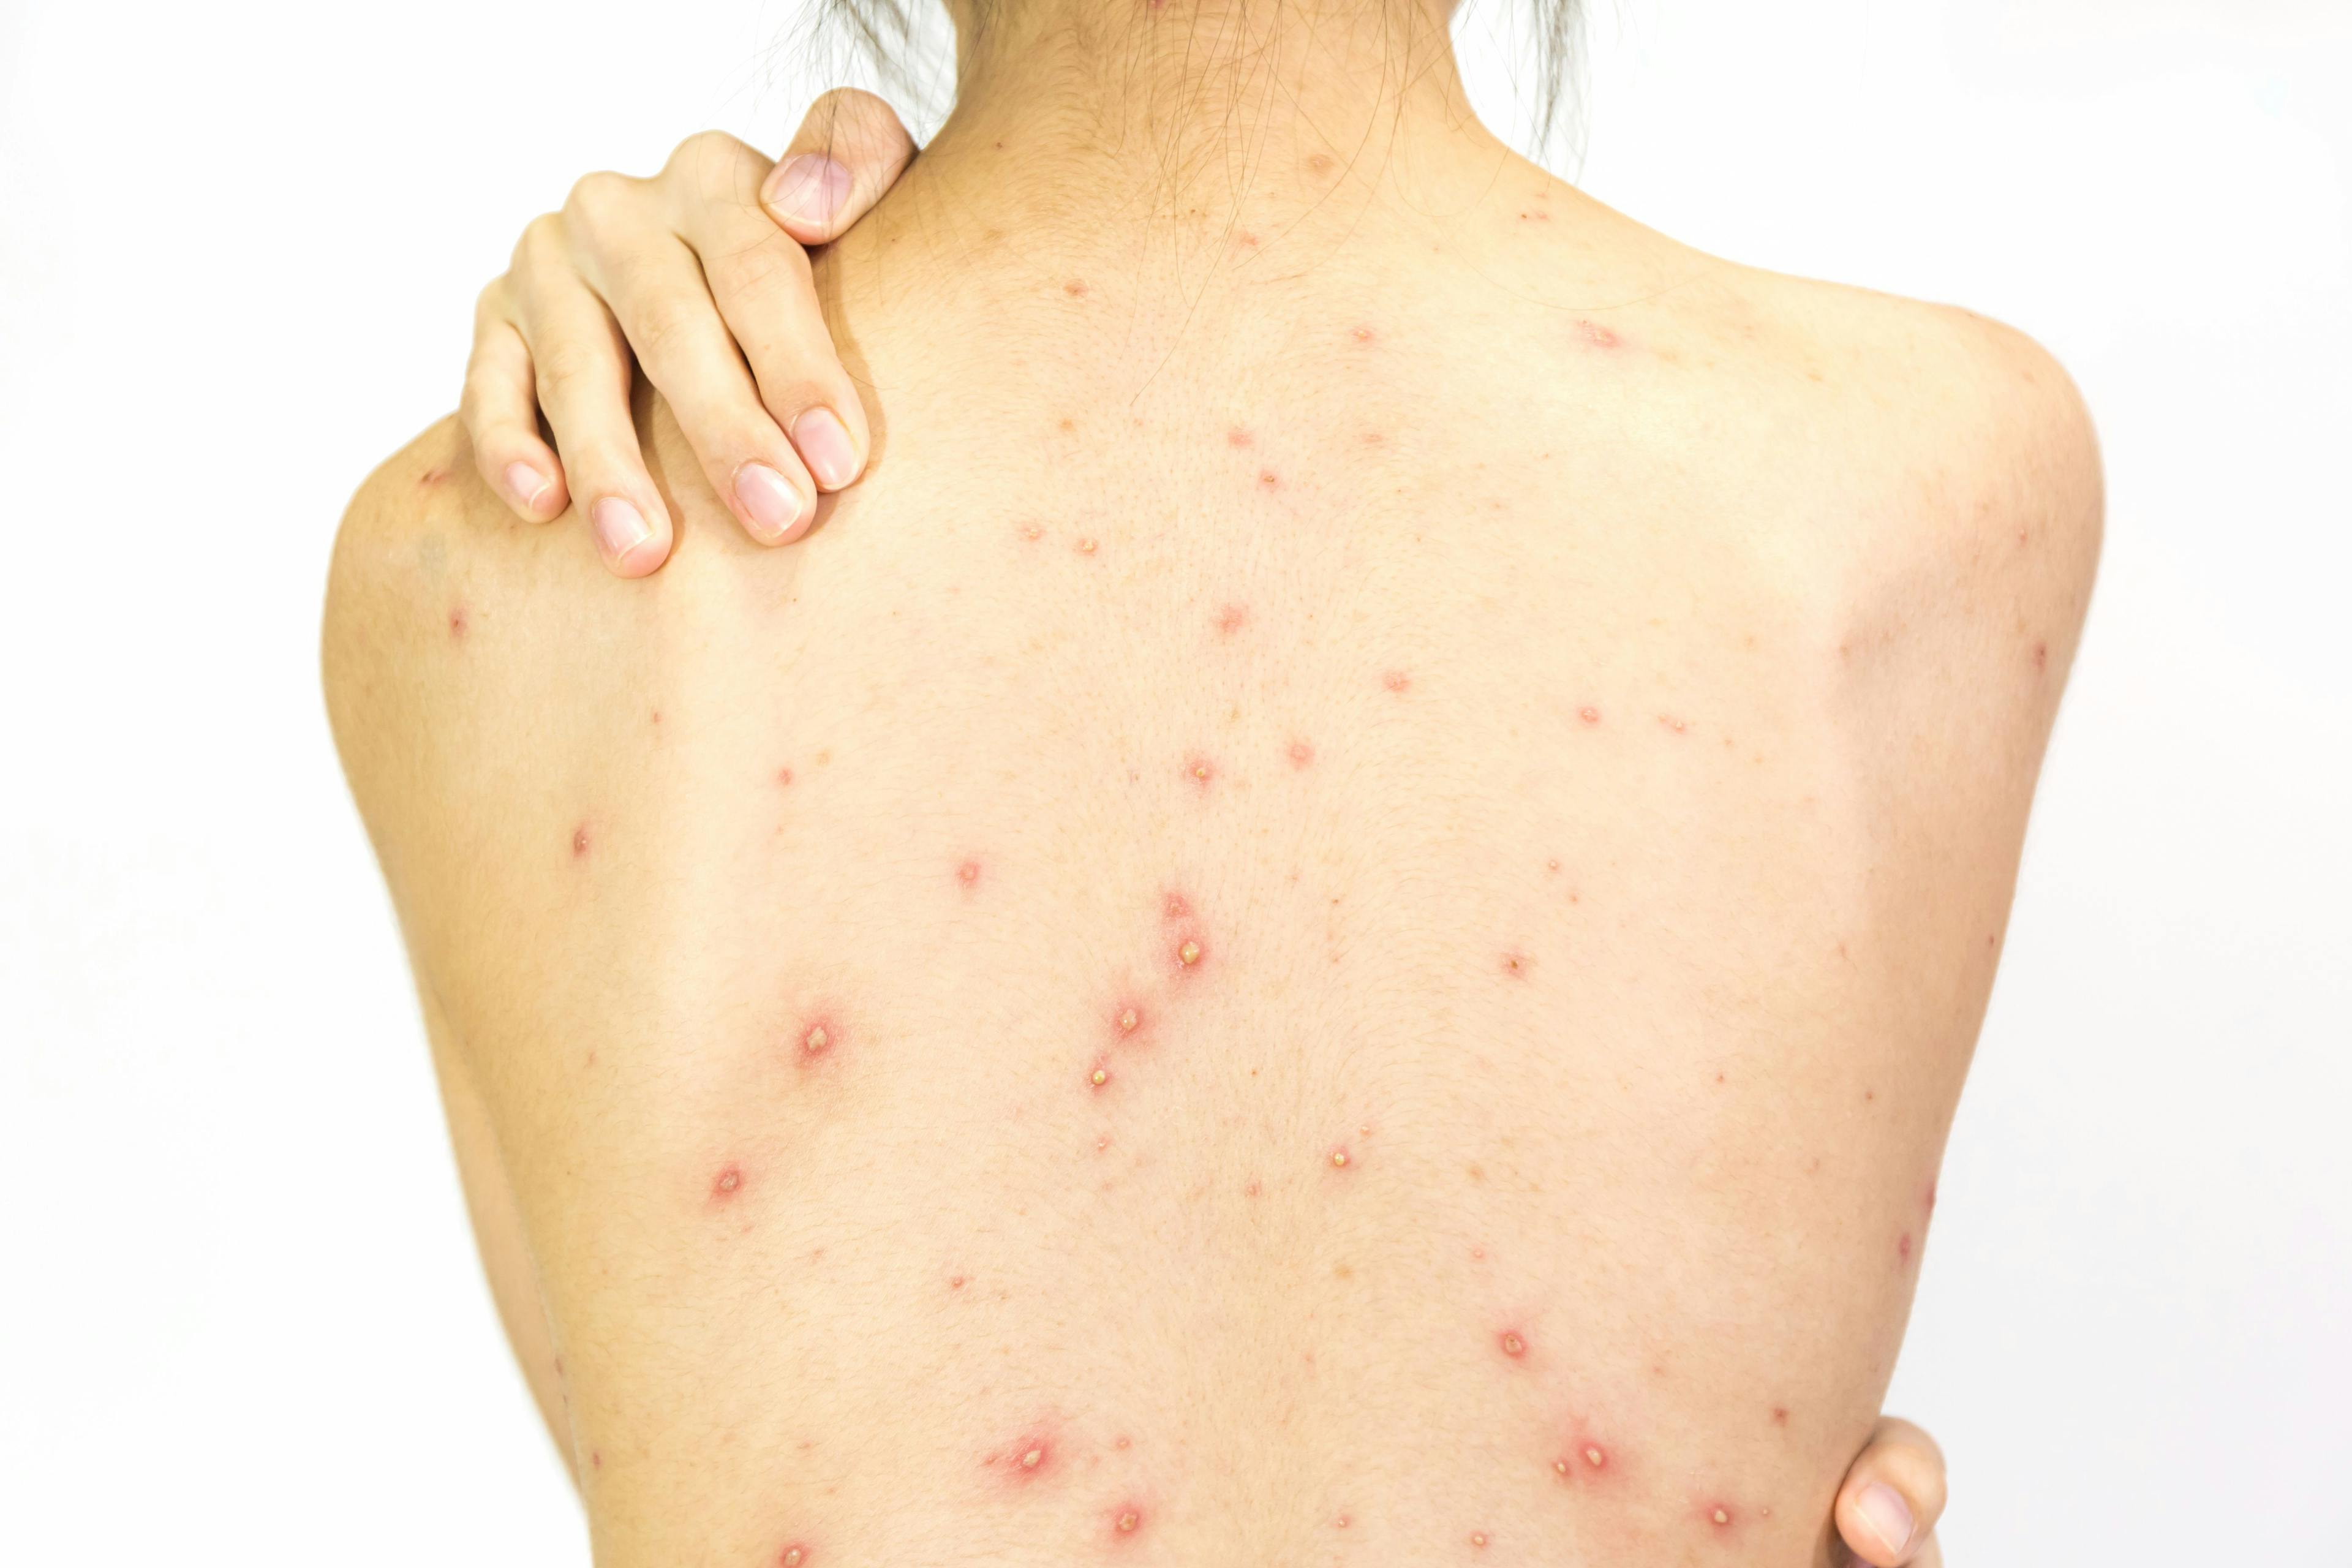 All You Need to Know About Back Acne